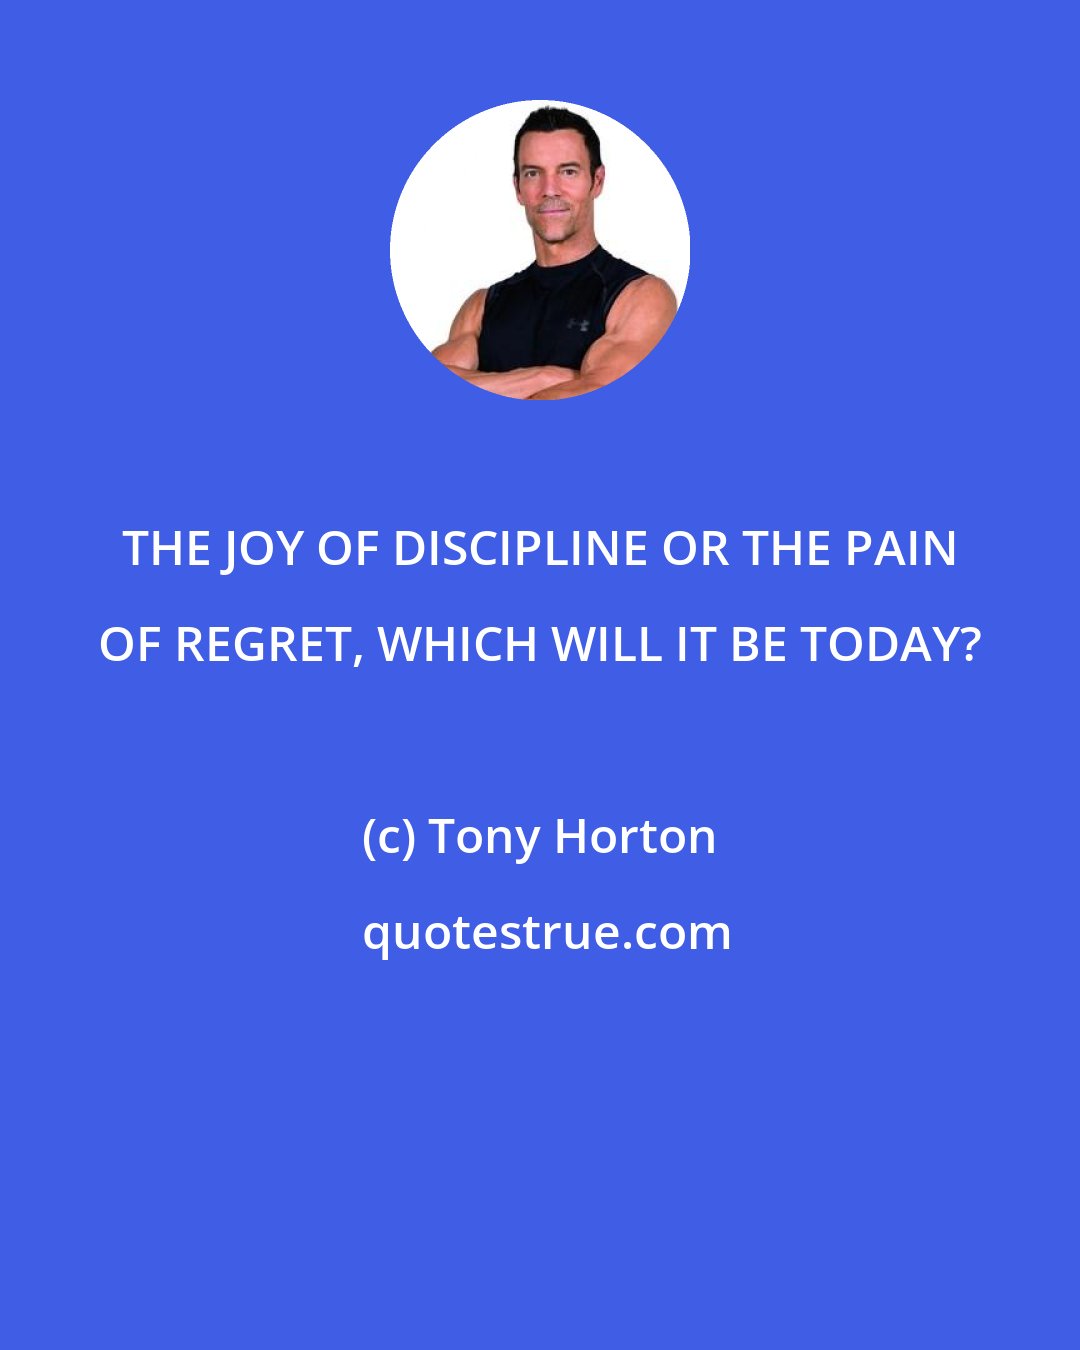 Tony Horton: THE JOY OF DISCIPLINE OR THE PAIN OF REGRET, WHICH WILL IT BE TODAY?